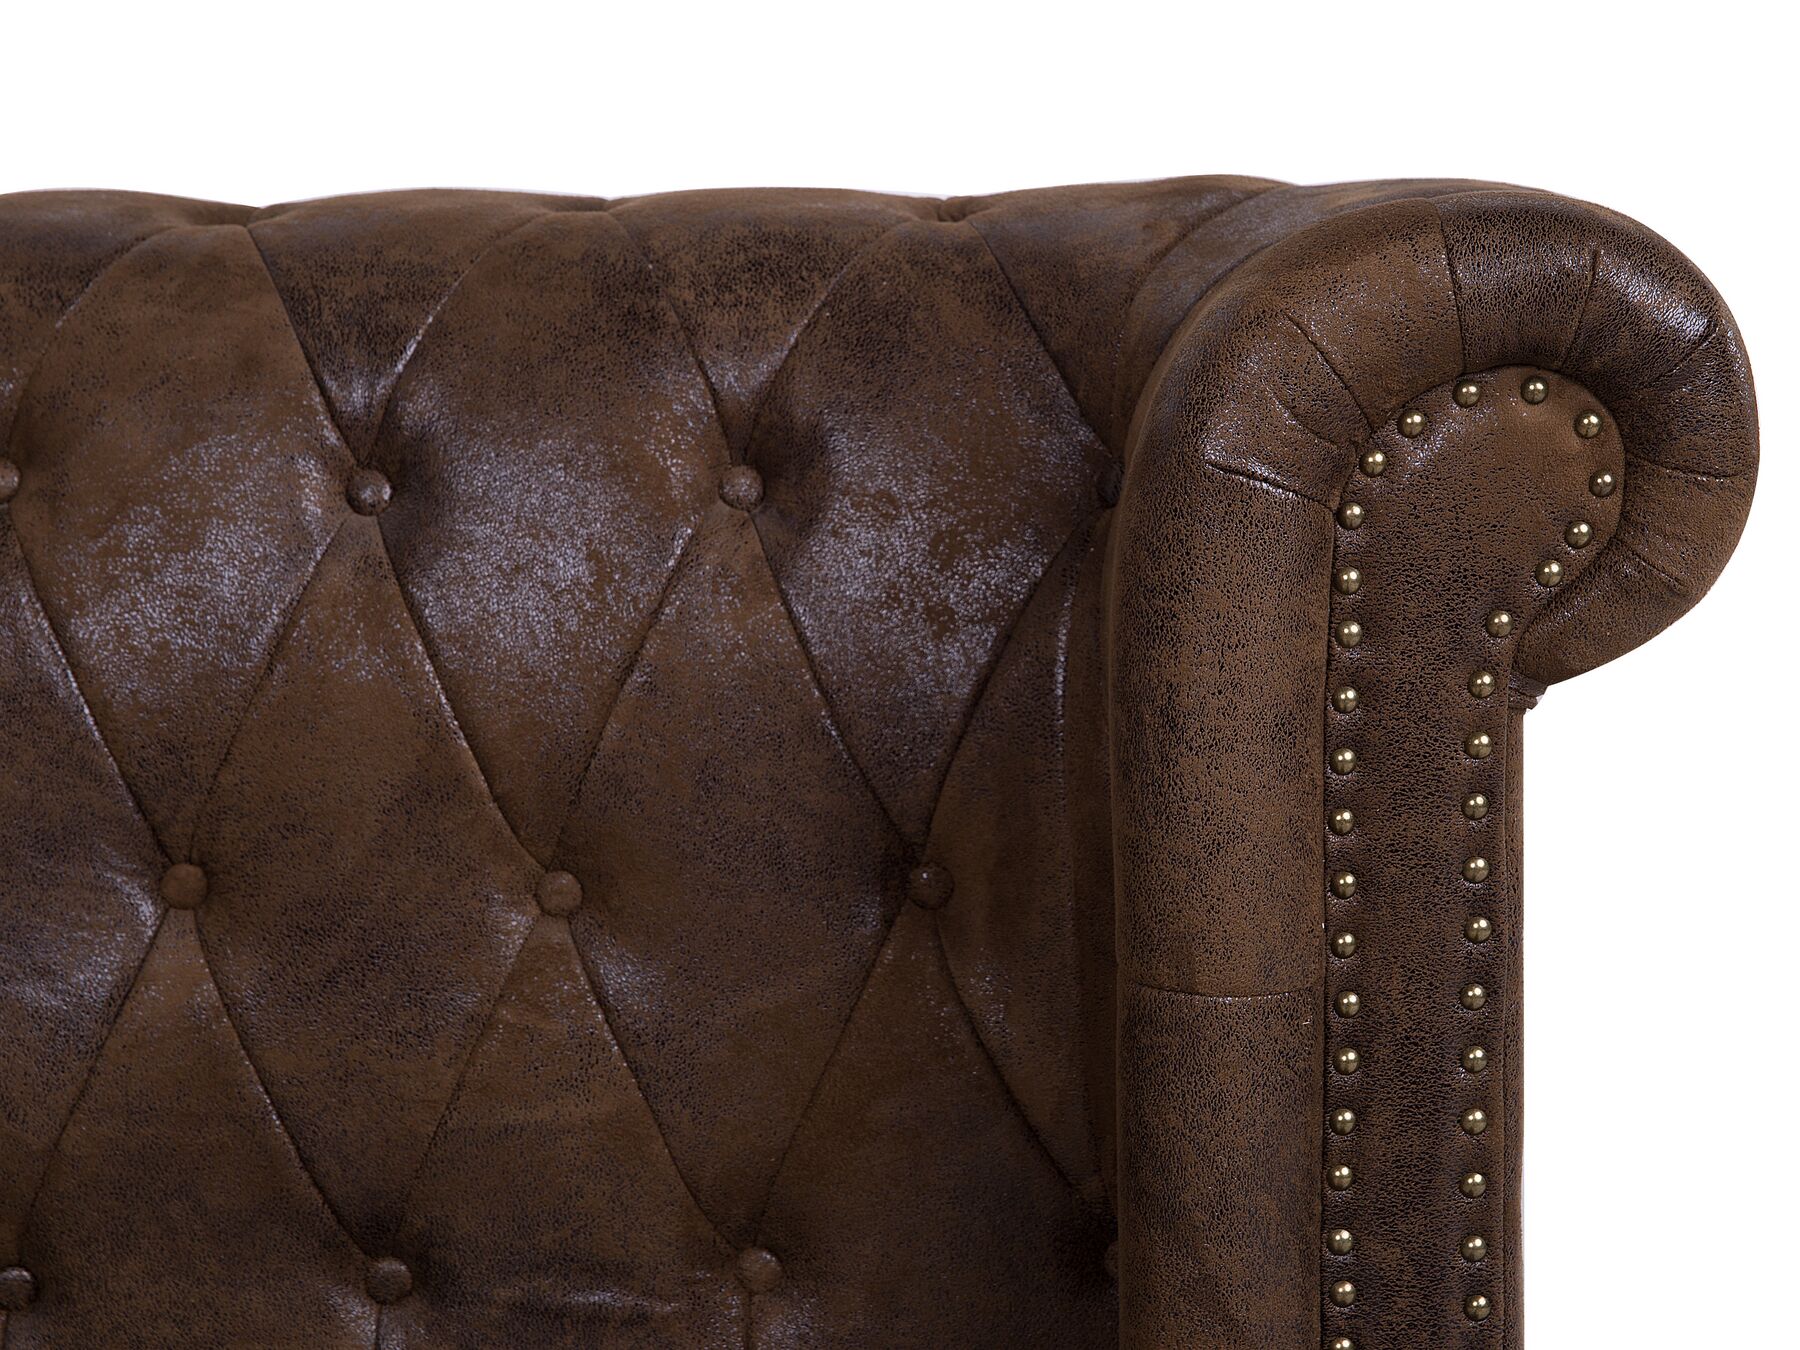 Cavaillon Leatherette Double Bed Brown